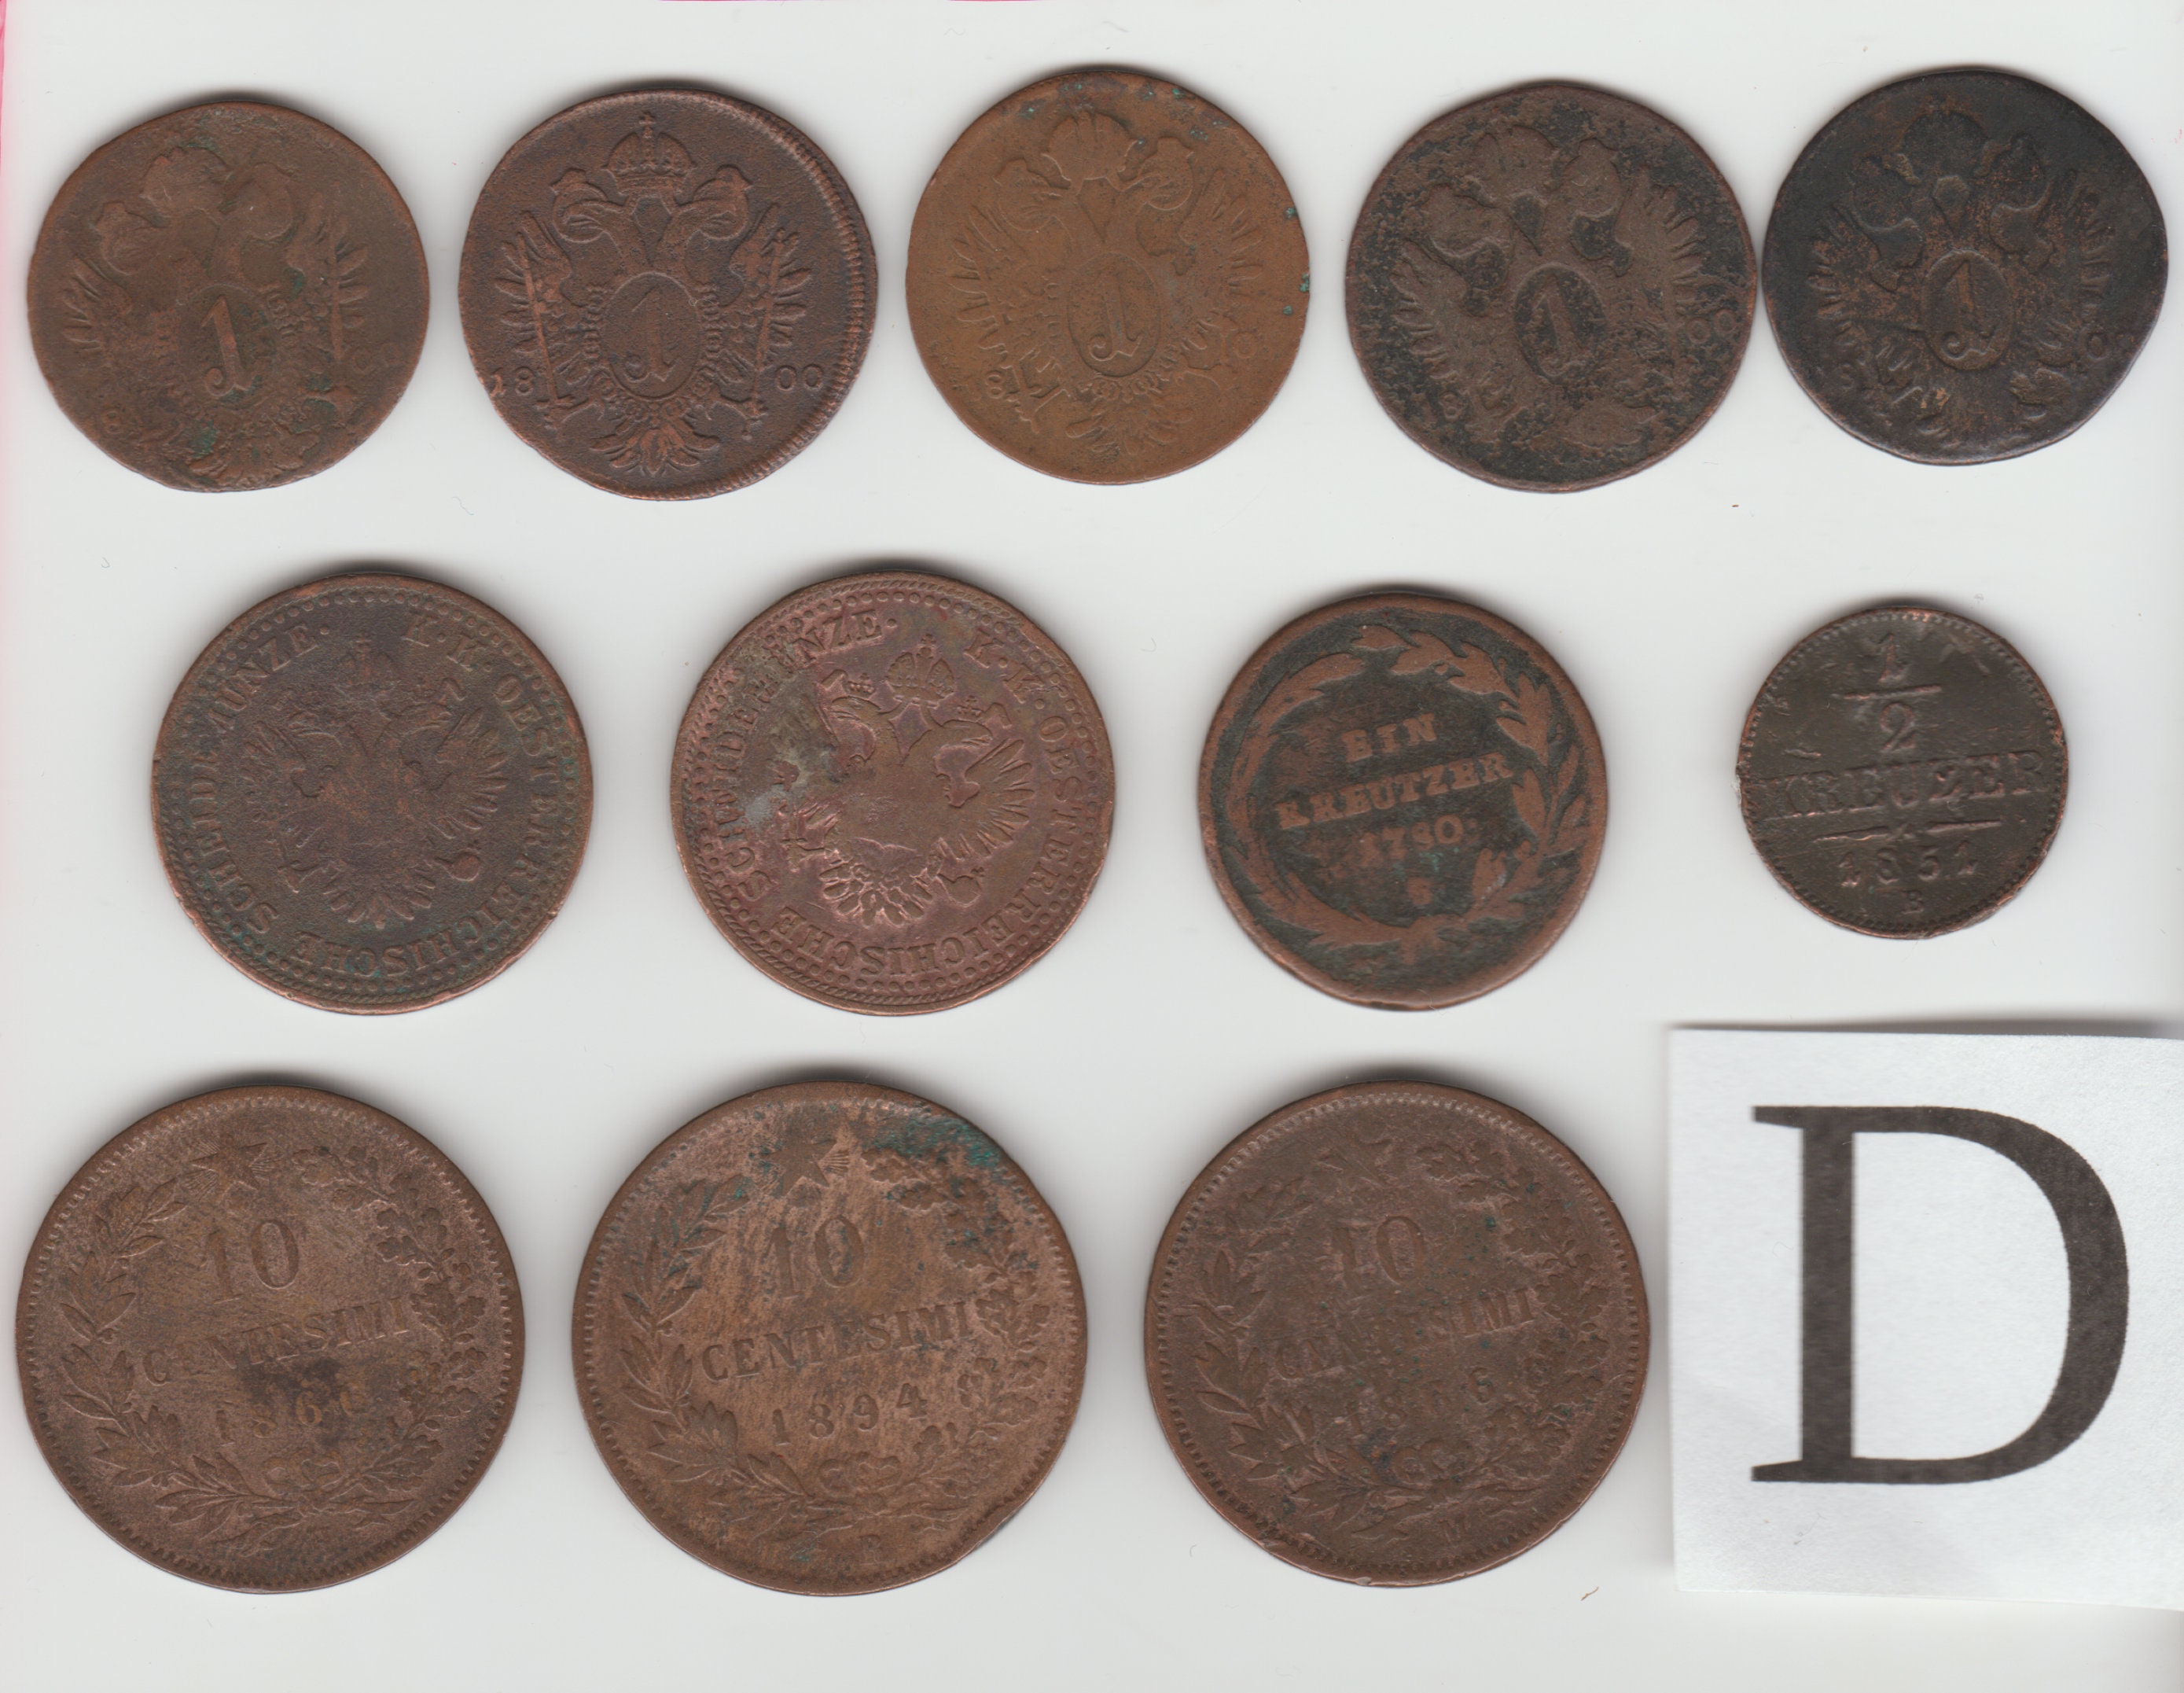 Pengő coin Forint coin Korona coin Hungary Fillér coin Krajcár Coin LOT You will find what you are looking for!